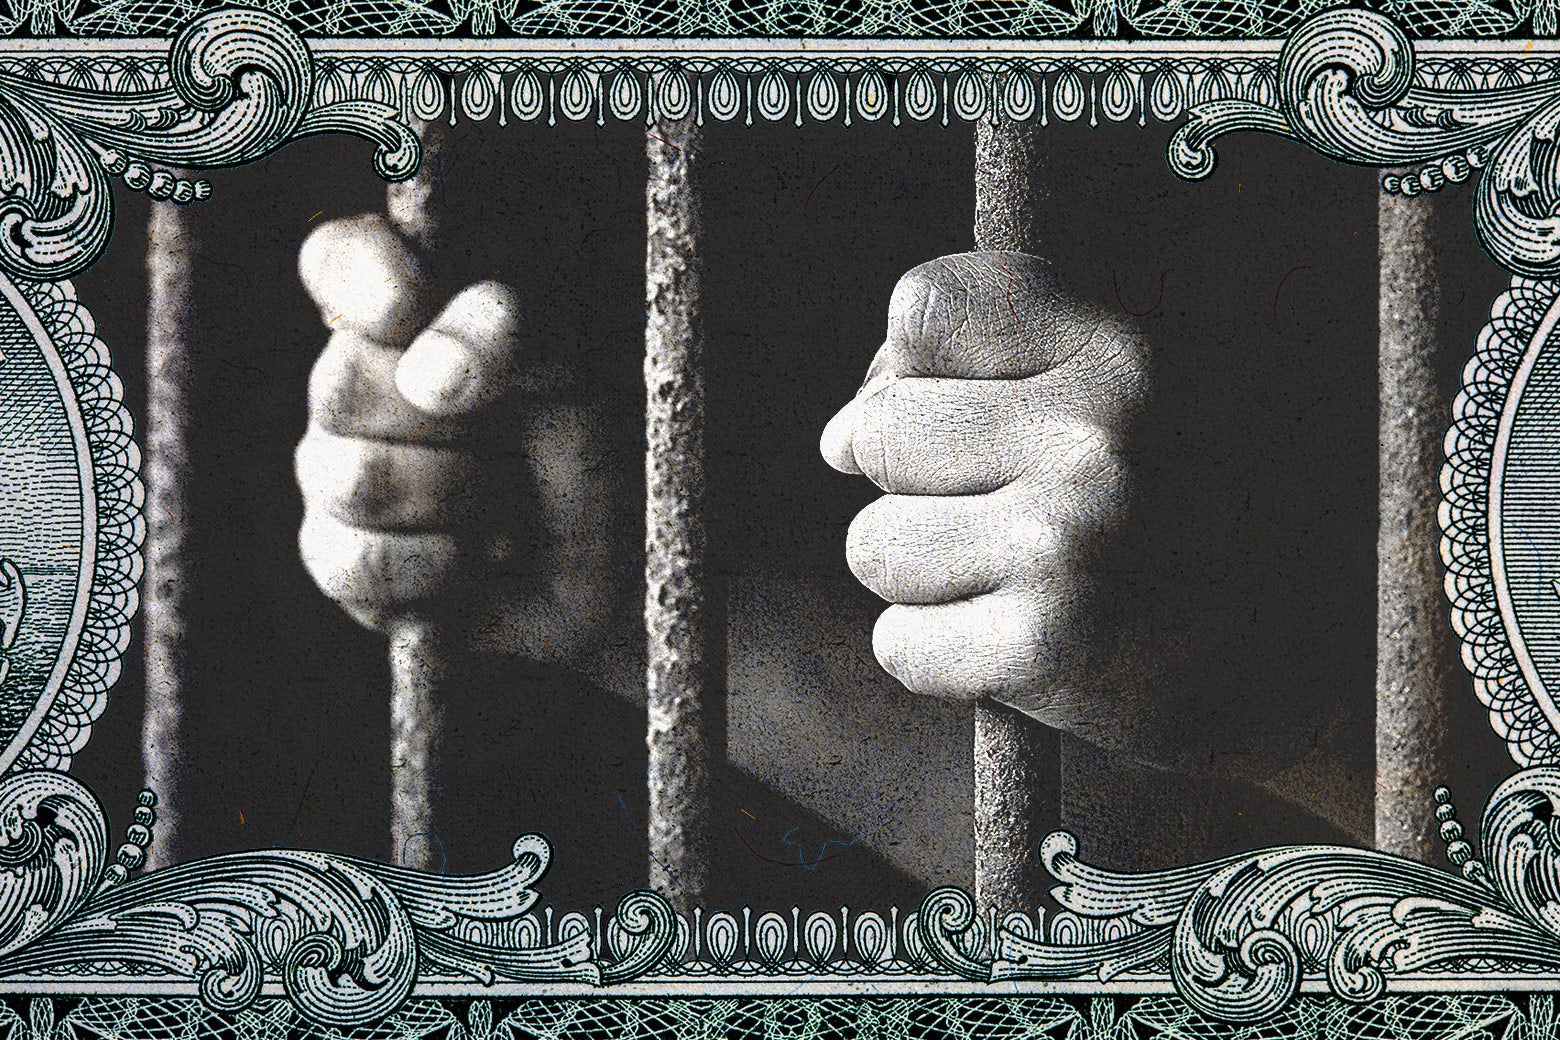 Two hands grabbing prison bars within the embellished border of a dollar bill